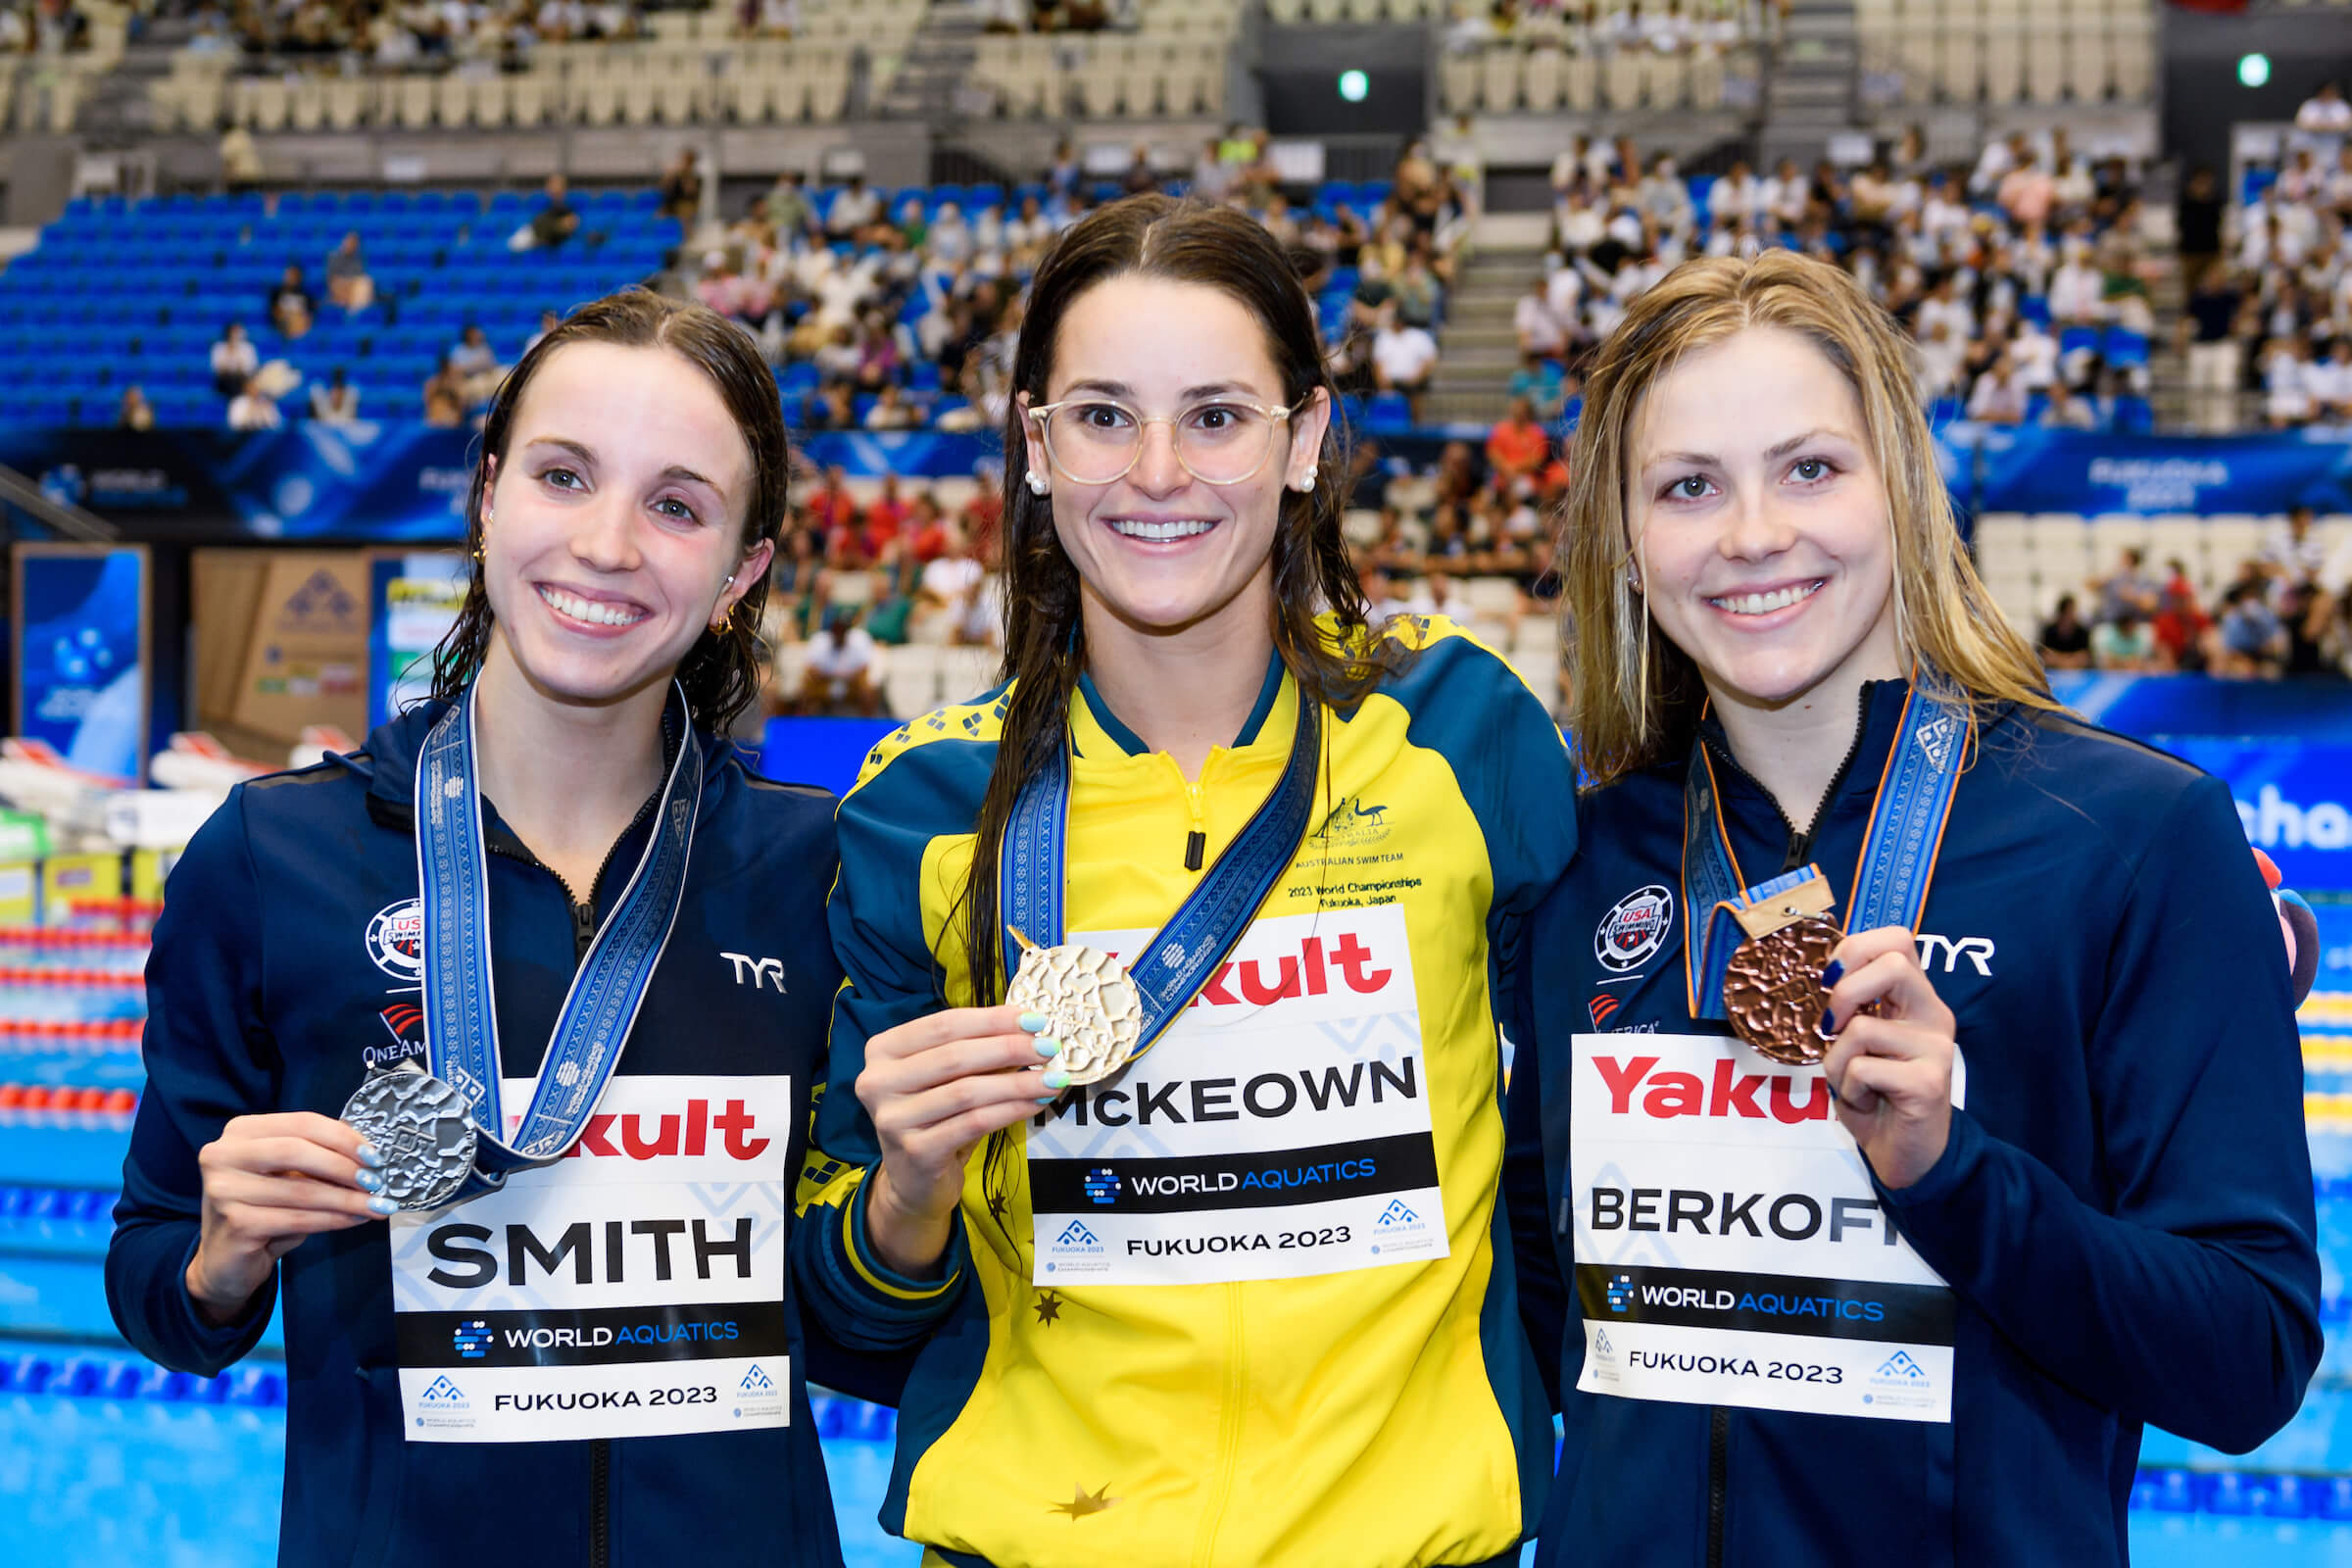 Regan Smith of United States of America, silver, Kaylee Mckeown of Australia, gold, Katharine Berkoff of United States of America, bronze show the medals after competing in the 100m Backstroke Women Final during the 20th World Aquatics Championships at the Marine Messe Hall A in Fukuoka (Japan), July 25th, 2023.